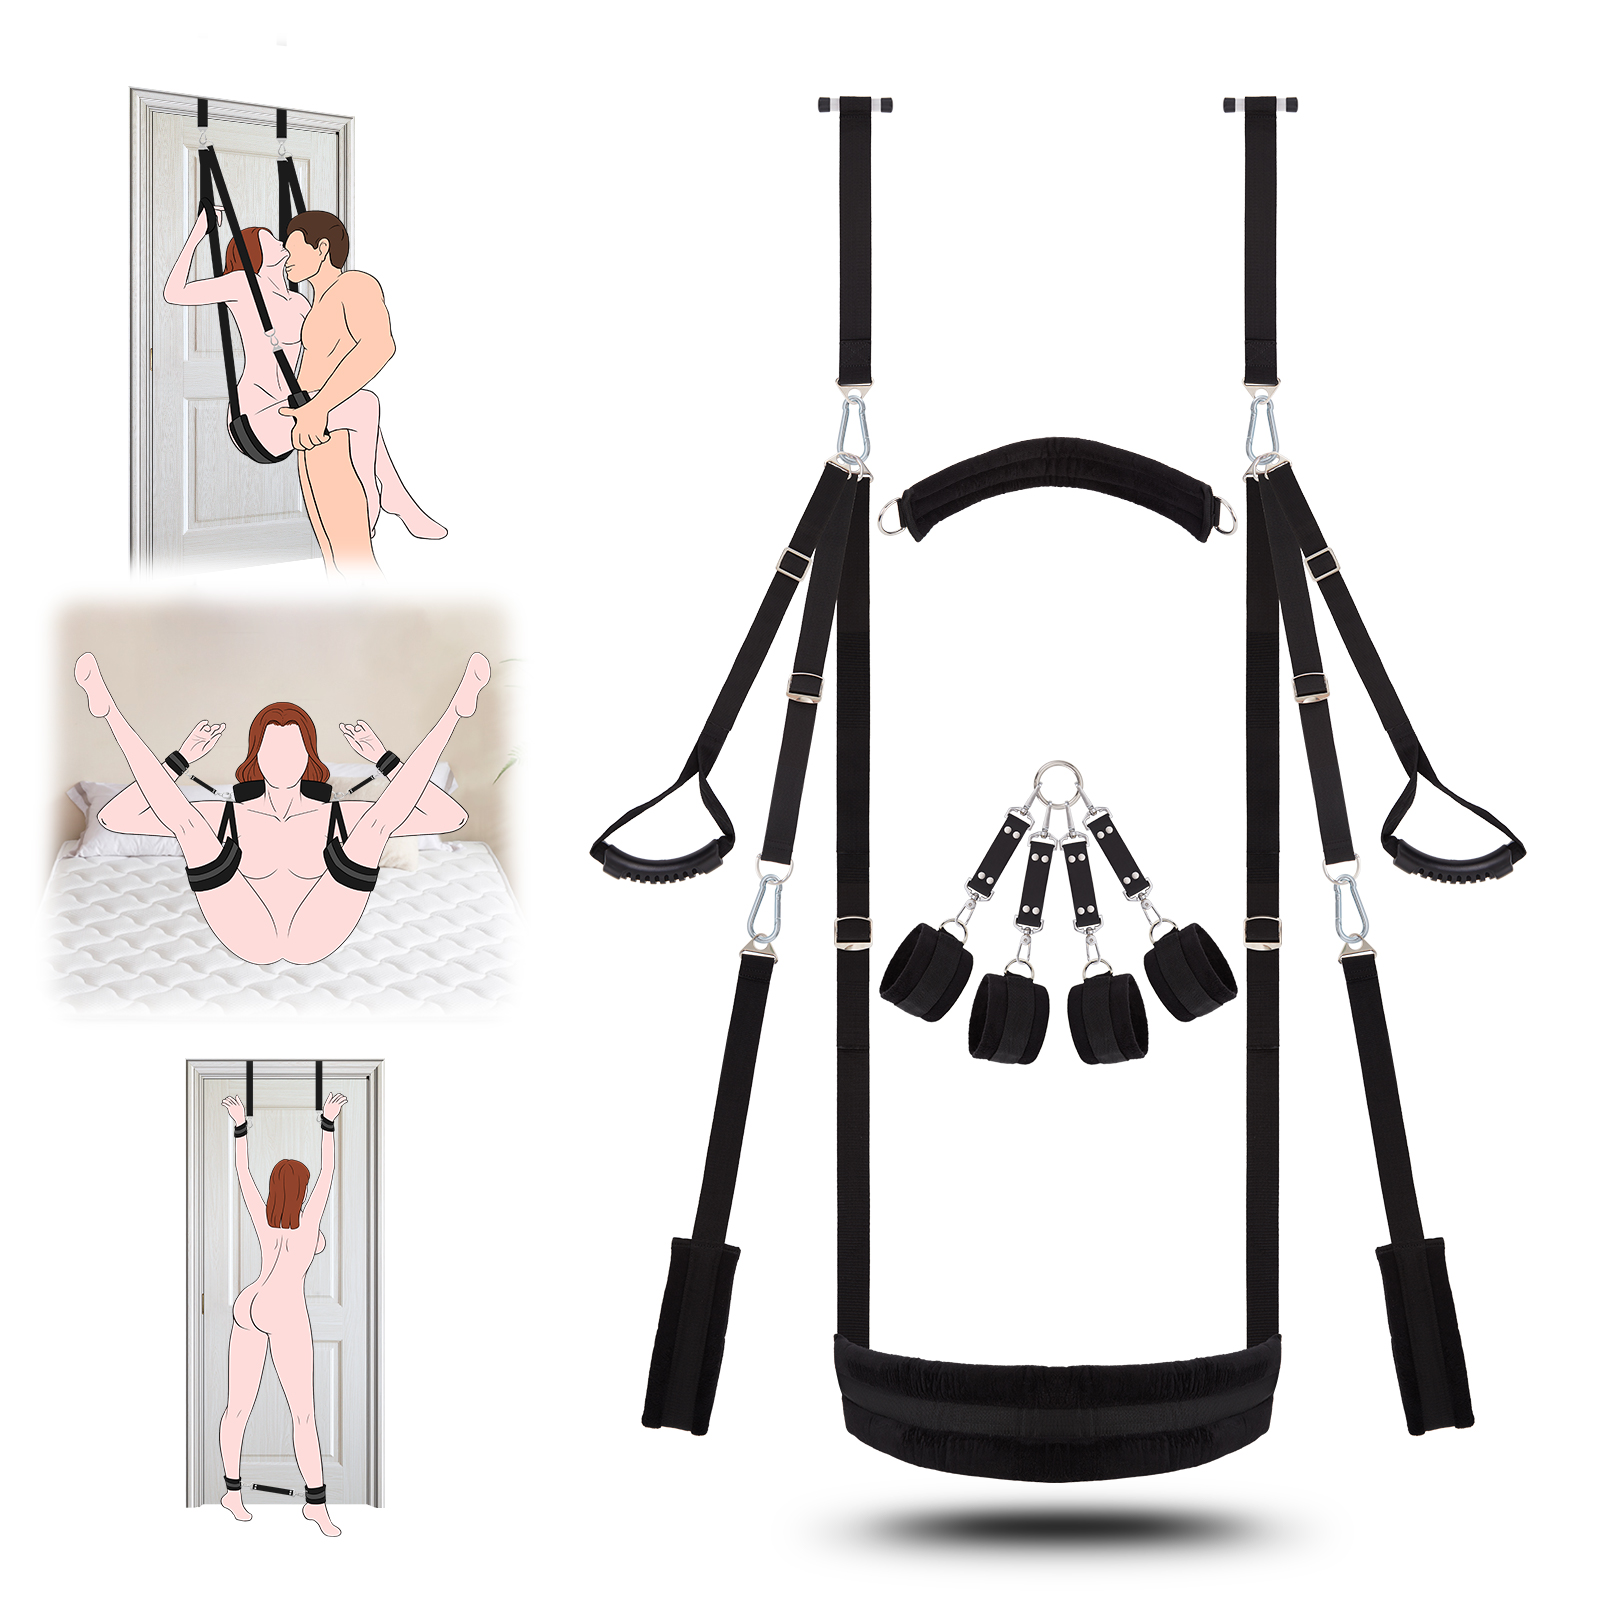 Sex Swing BDSM Bondage Restraints Kit - UTIMI 2 in 1 Door Swing and Sex Restraints Wrist and Thigh Ankle Restraint Cuffs Neck to Leg Sex Toy with Handcuffs and Leg Straps Adult Sex Toys for Couples